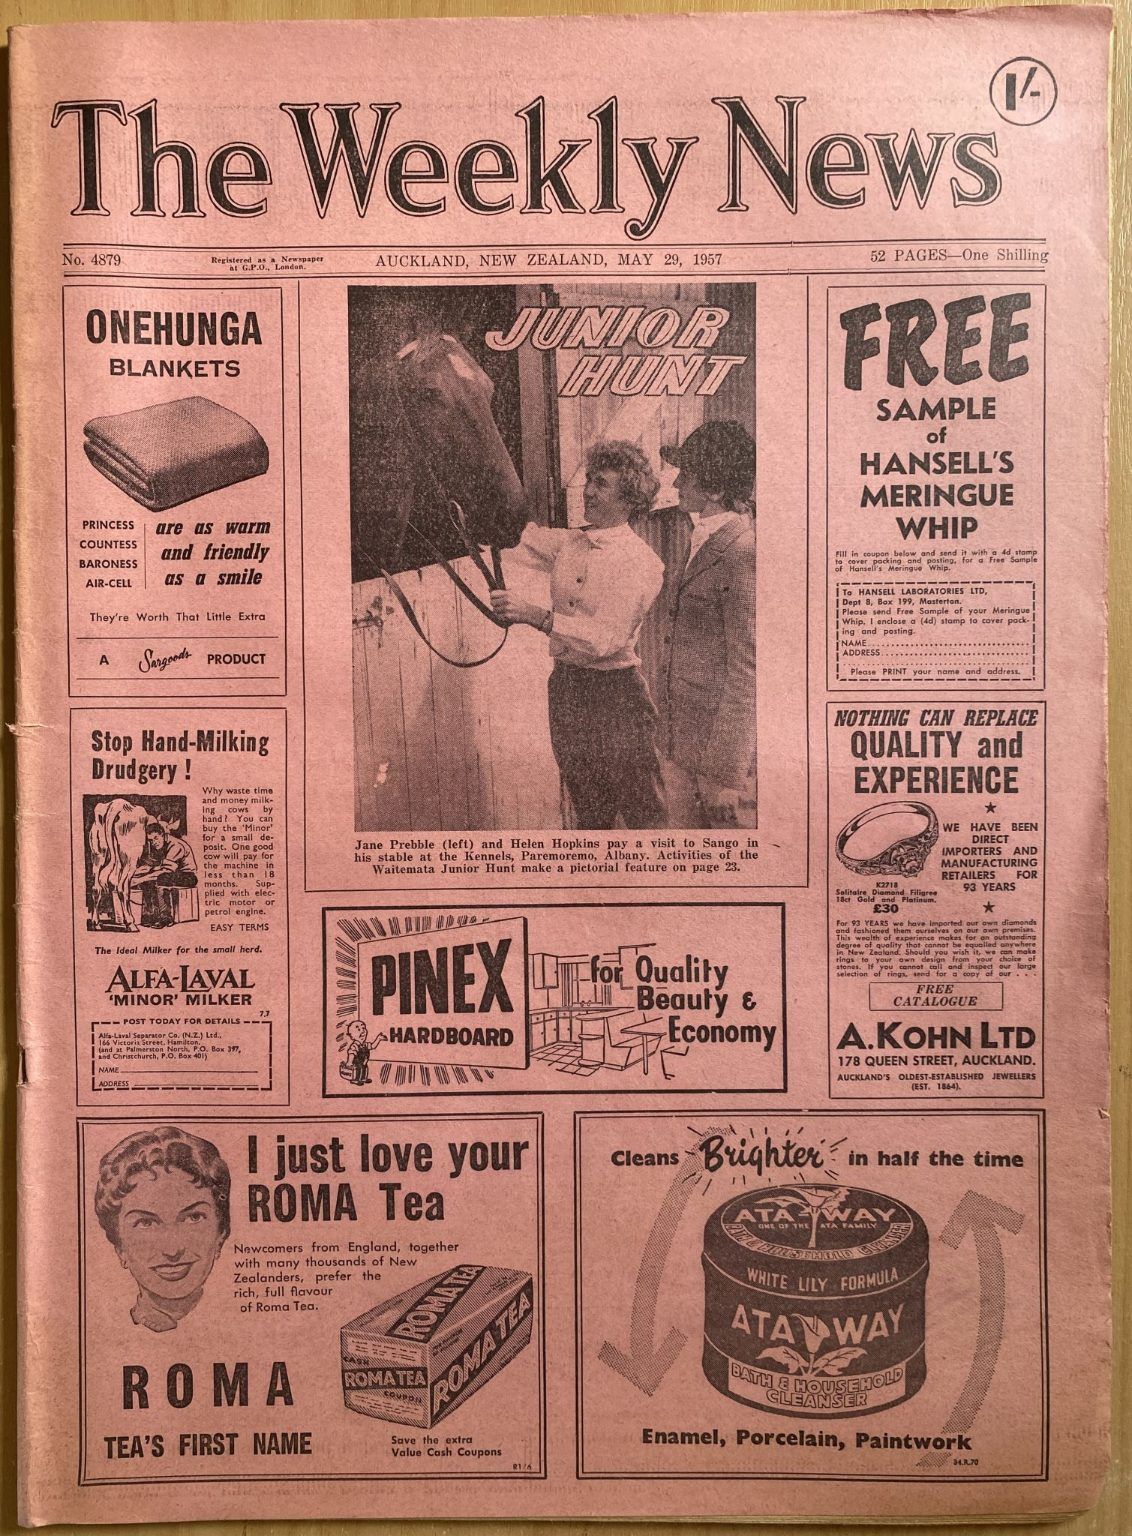 OLD NEWSPAPER: The Weekly News, No. 4879, 29 May 1957